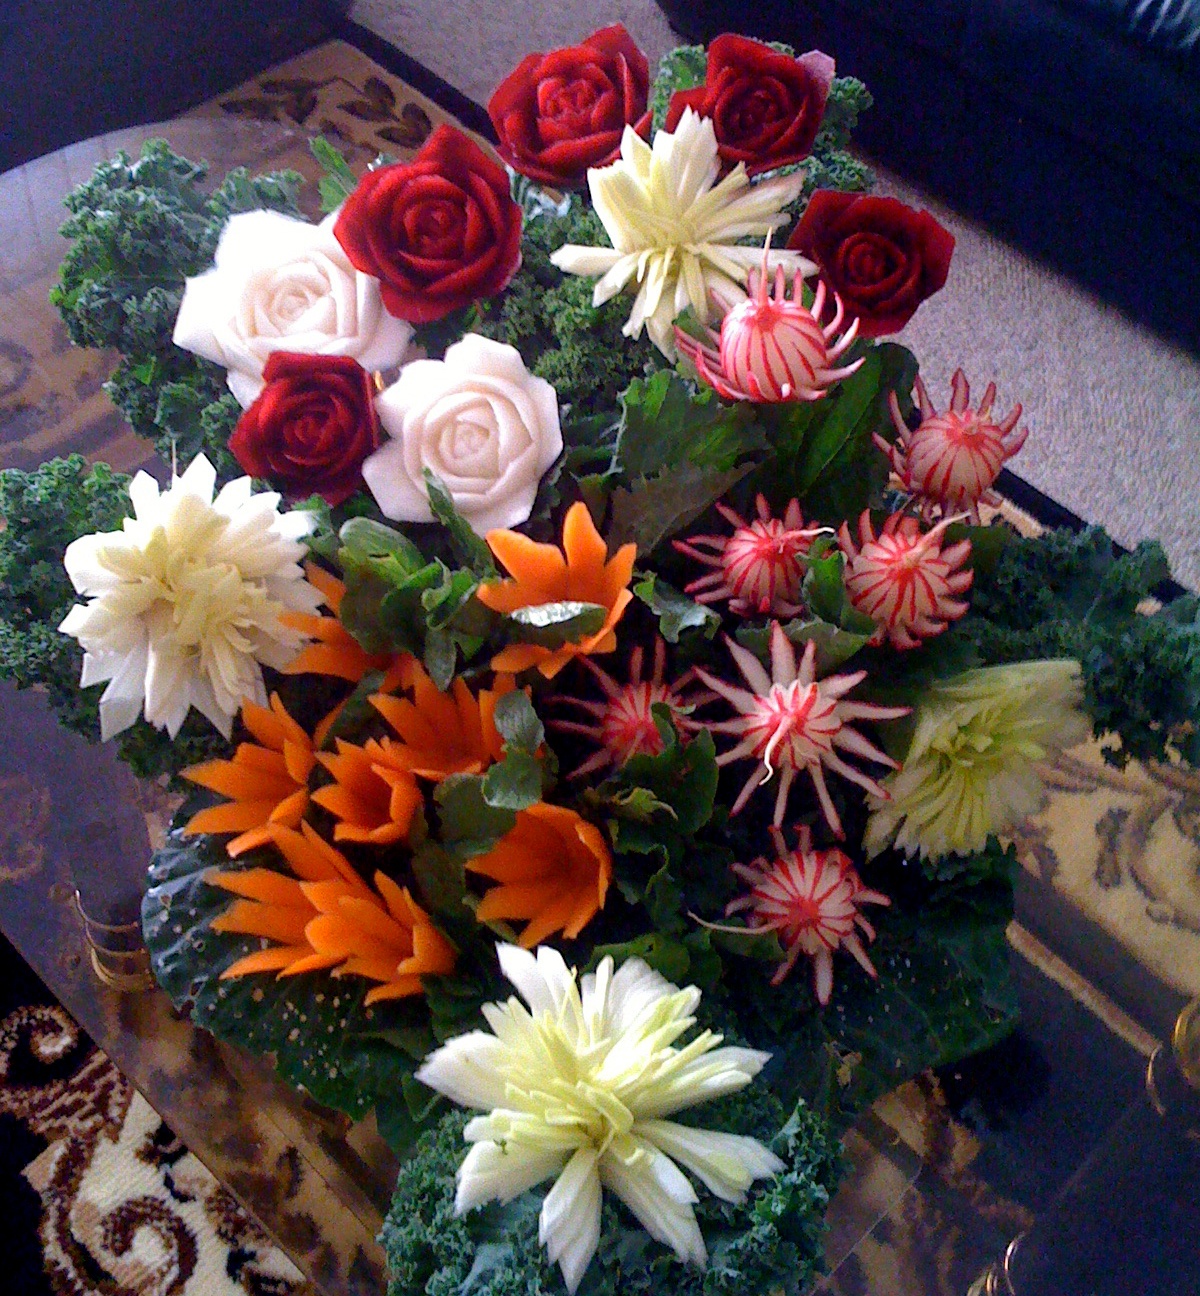 CREATION - Pictured here is a bouquet created by Lyn Attanayake. All of the hand-crafted flowers are made out of vegetables.